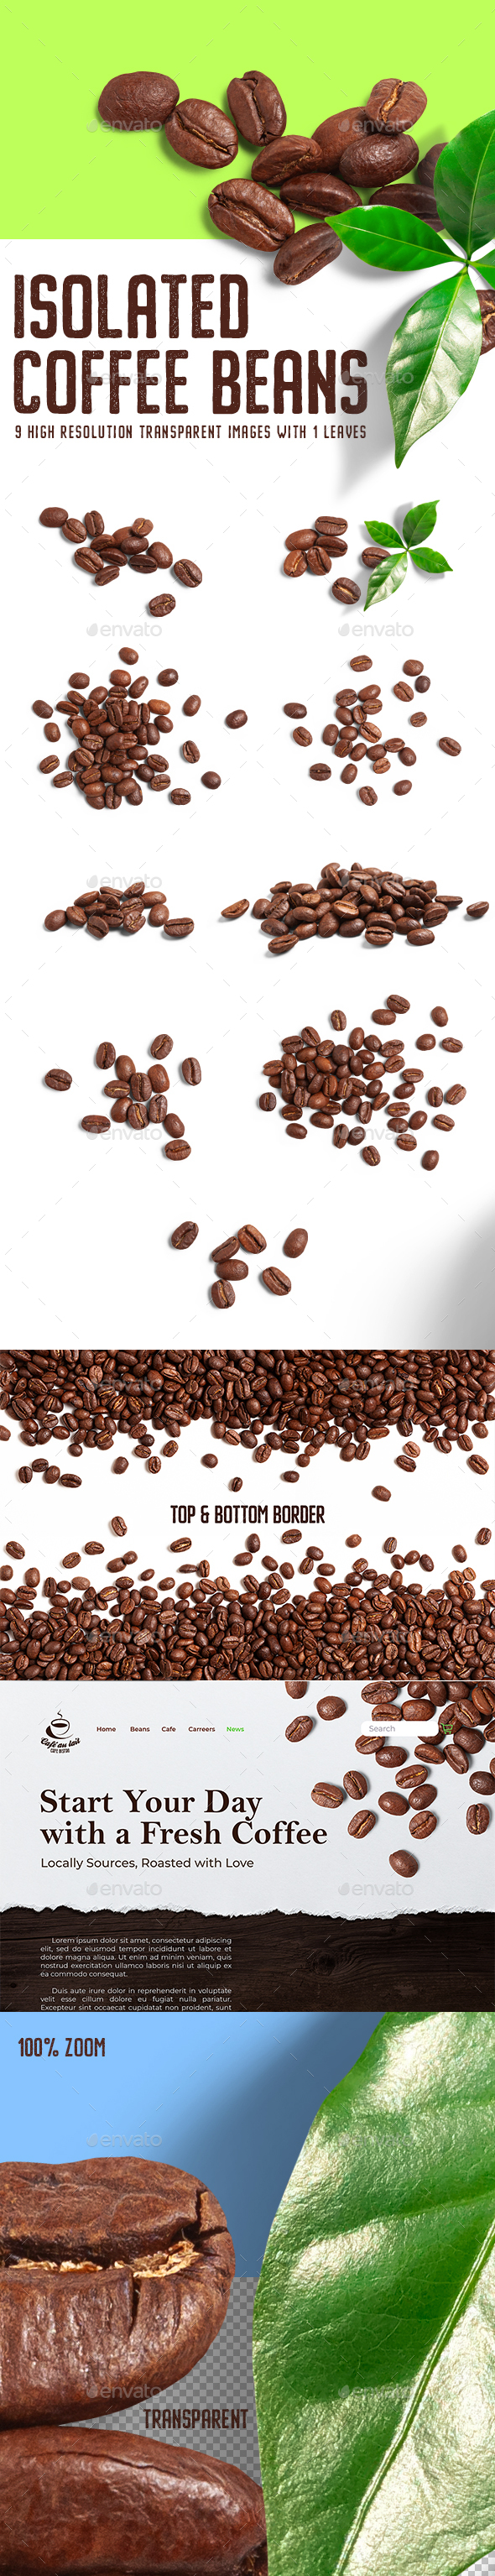 Isolated Coffee Beans